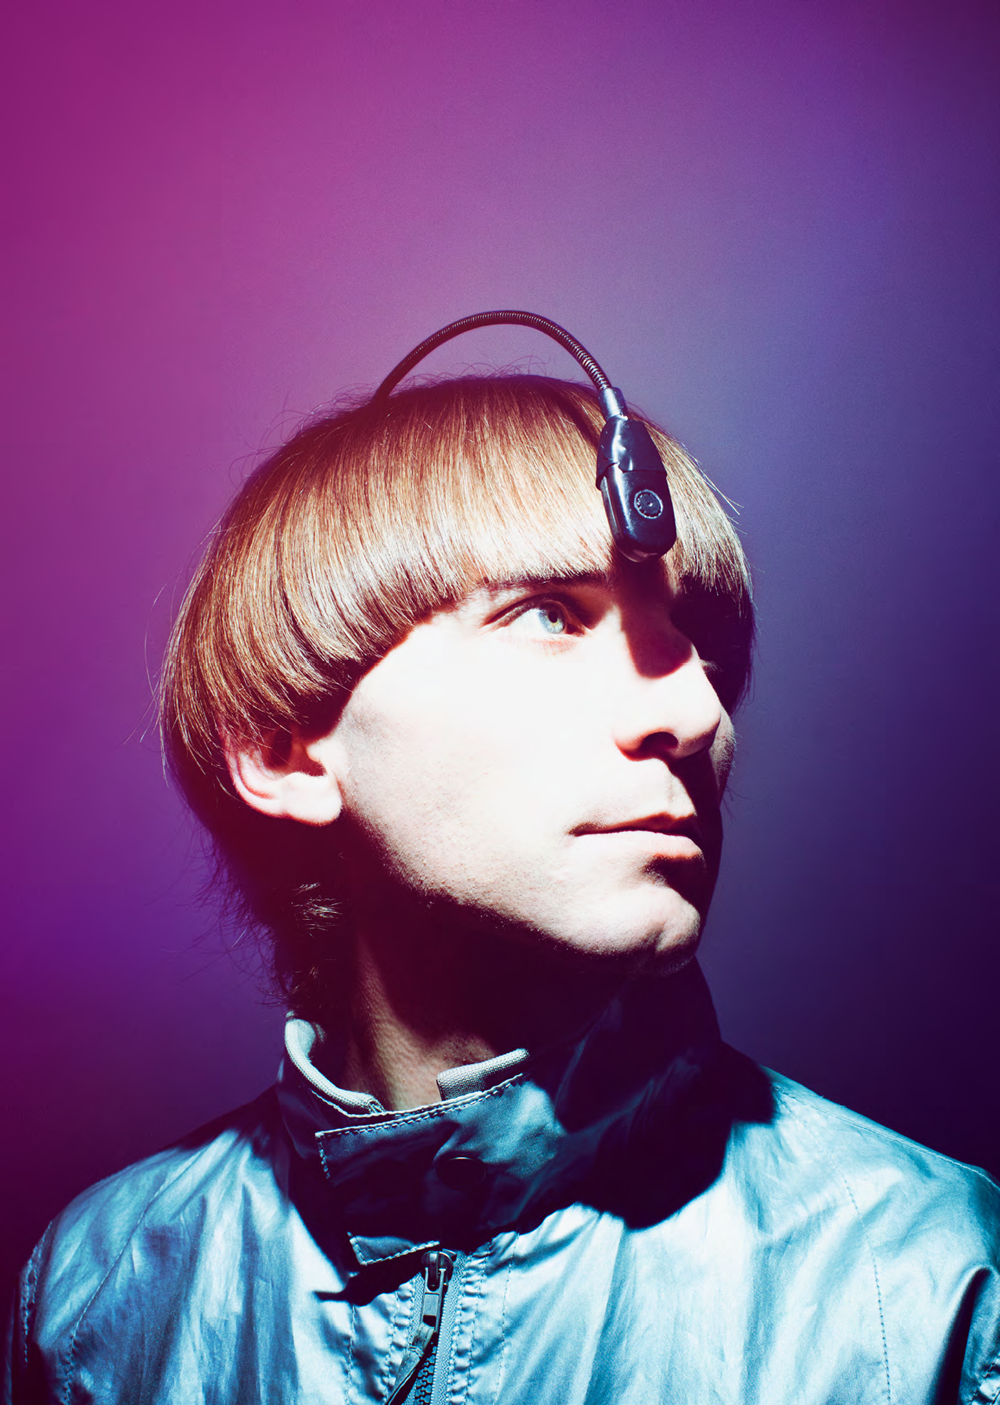 A bronze sculpture of Neil Harbisson with his eyeborg antenna. The antenna goes from inside the back of his head to hanging over his forehead.